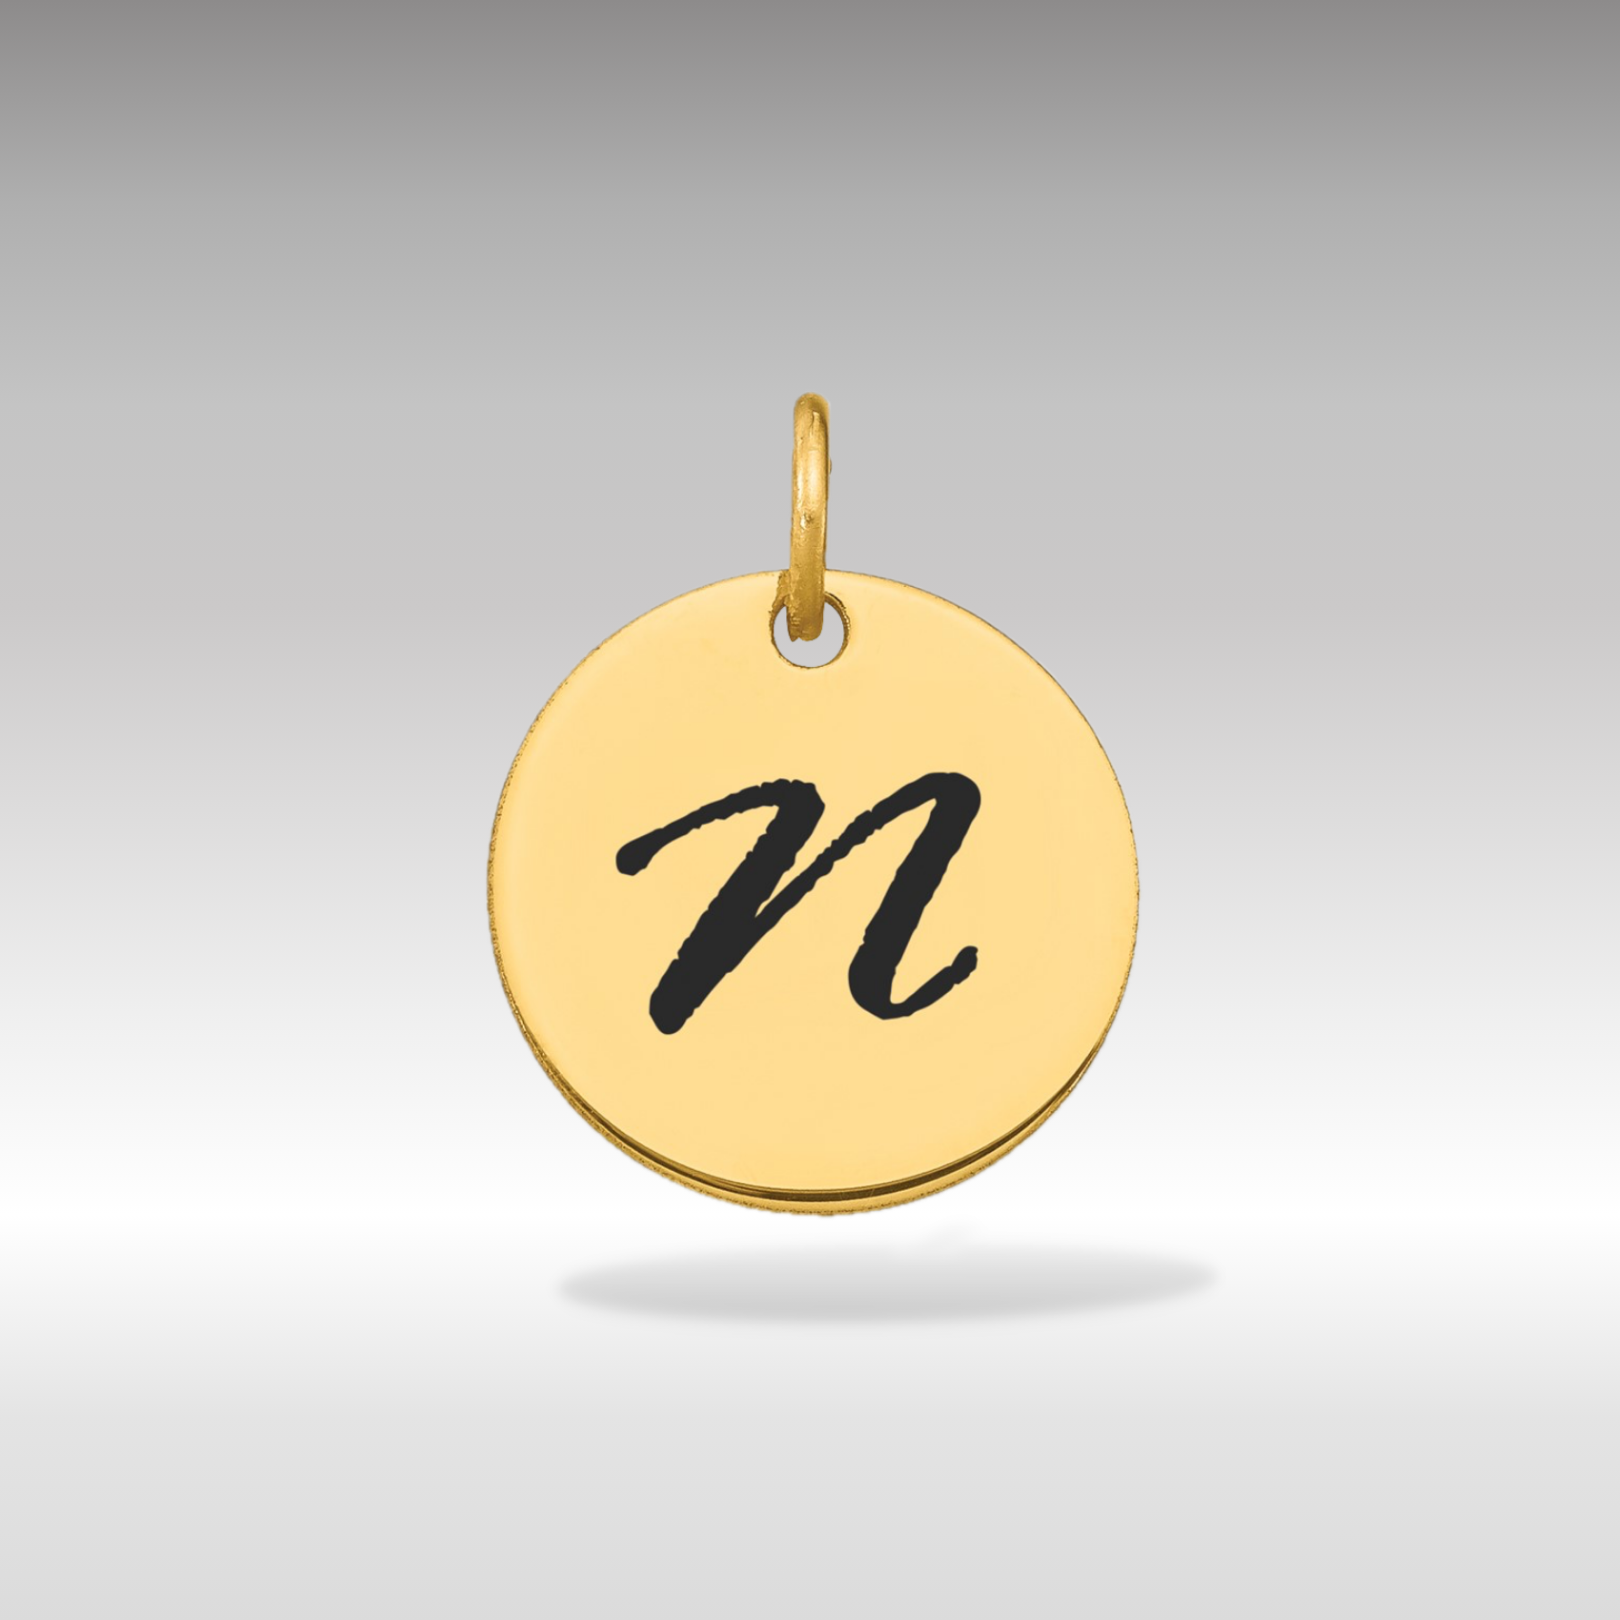 14K Gold Script Letter 'n' Circular Charm with Black Enamel - Charlie & Co. Jewelry